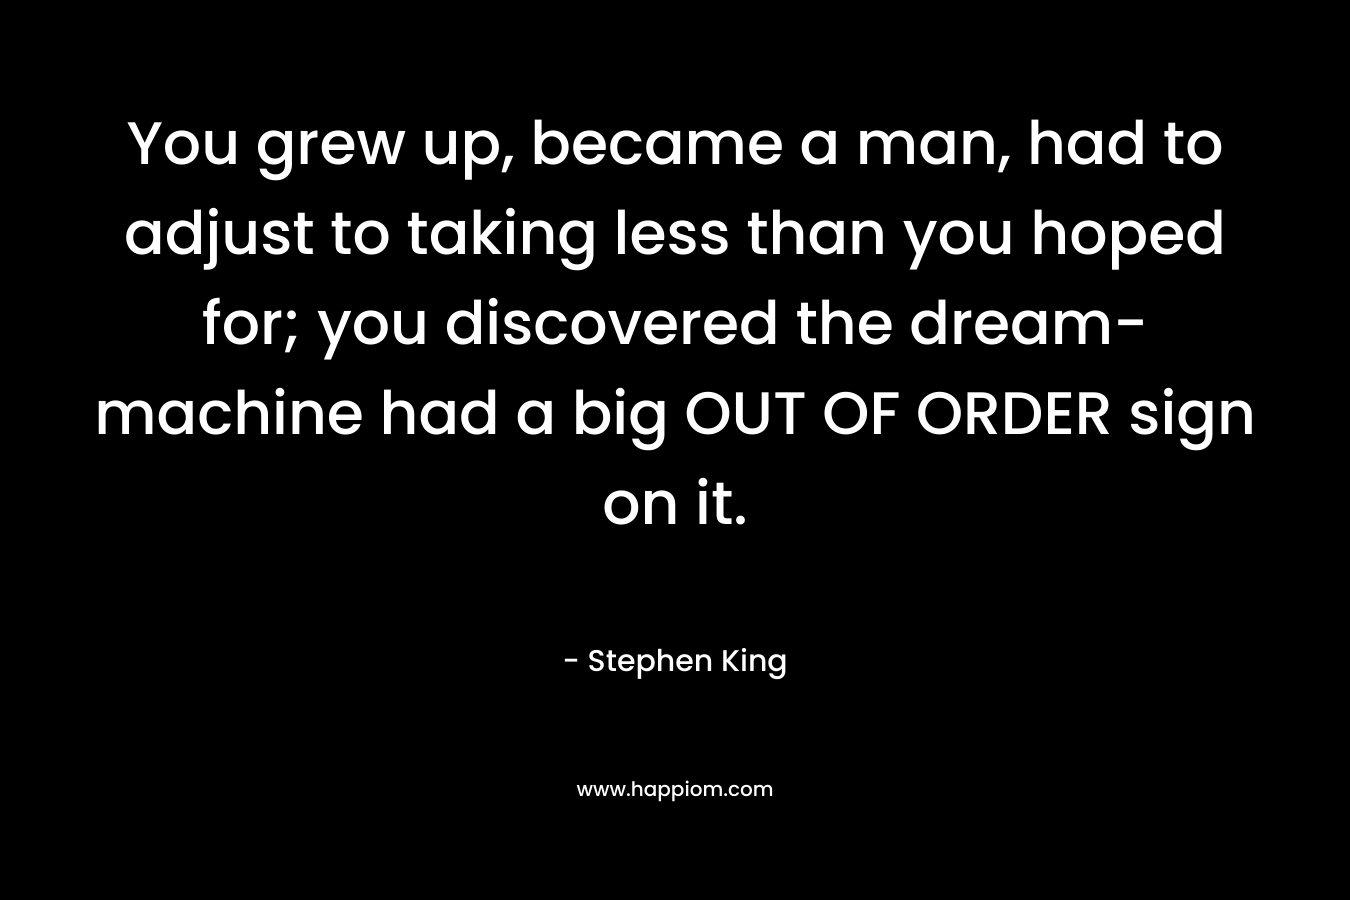 You grew up, became a man, had to adjust to taking less than you hoped for; you discovered the dream-machine had a big OUT OF ORDER sign on it.